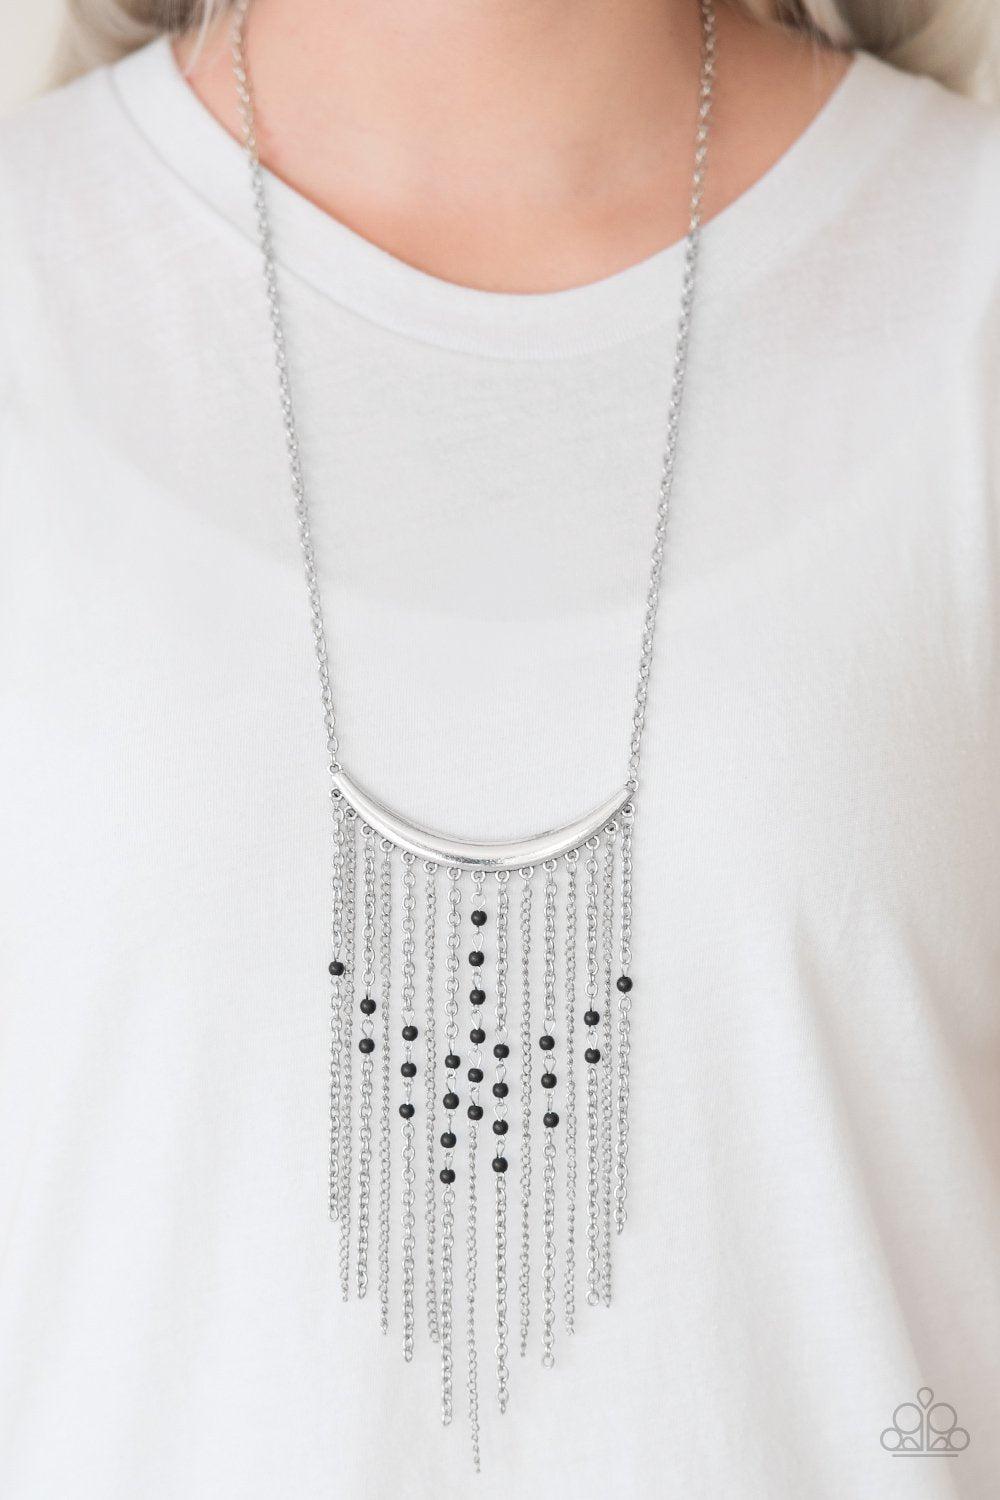 Runaway Rumba Silver and Black Fringe Necklace - Paparazzi Accessories-CarasShop.com - $5 Jewelry by Cara Jewels